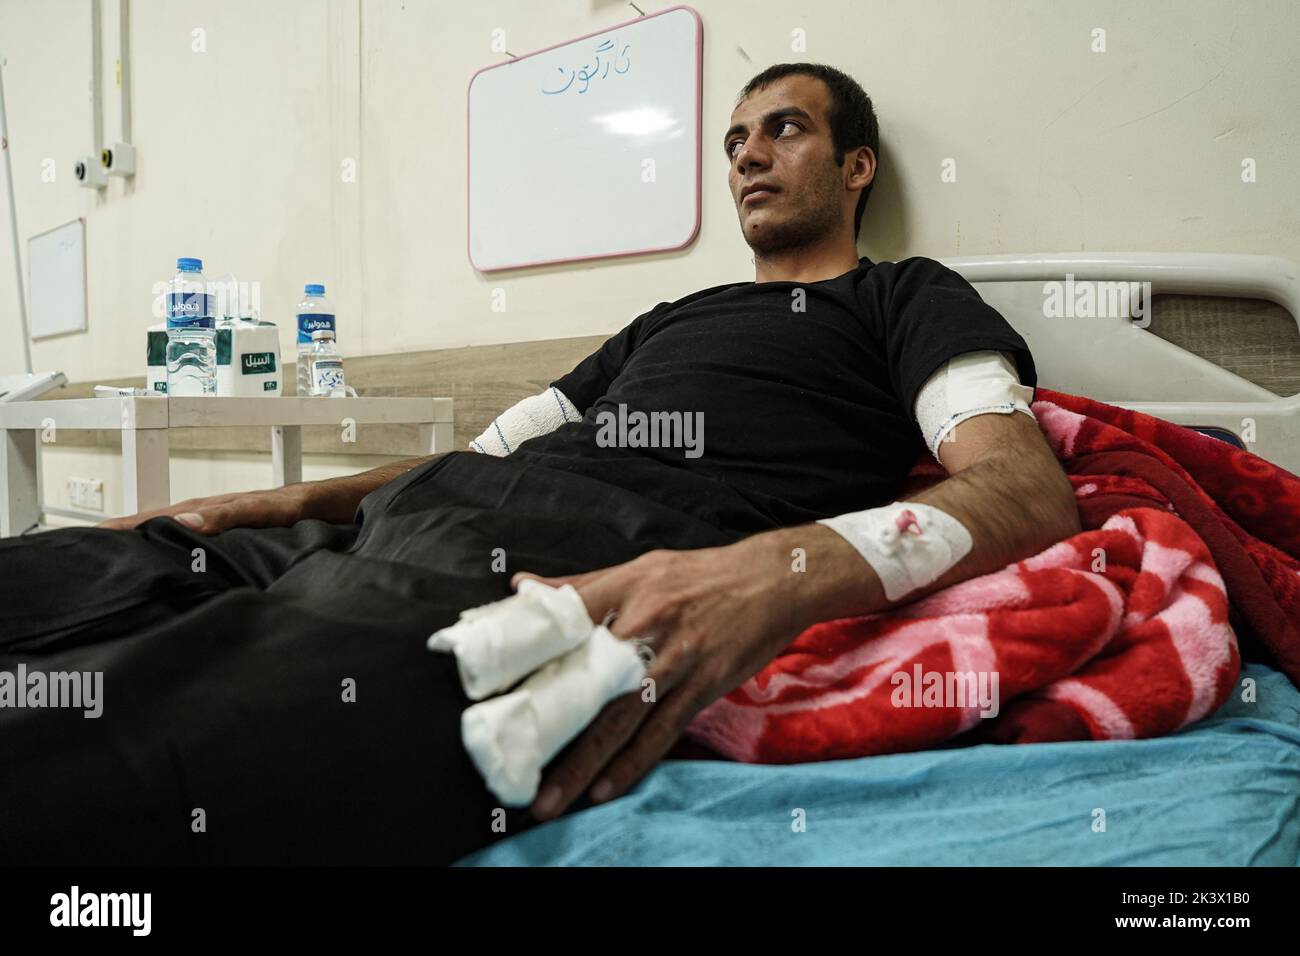 28 September 2022, Iraq, Erbil: A wounded member of the opposition Kurdistan Freedom Party (PAK) lies on a bed at a hospital following attacks by Iranian explosives-laden drones and rockets targeting the opposition Kurdistan Freedom Party (PAK), the Kurdistan Democratic Party of Iran (KDPI), the Free Life Party of Kurdistan (PJAK), and Komala in the provinces of Erbil and Sulaymaniyah, Kurdish media reported. The death toll from the attacks on opposition groups in the autonomous region of Kurdistan rose to nine and at least 32 were also injured, Iraq's state news agency INA quoted Barzinji as Stock Photo